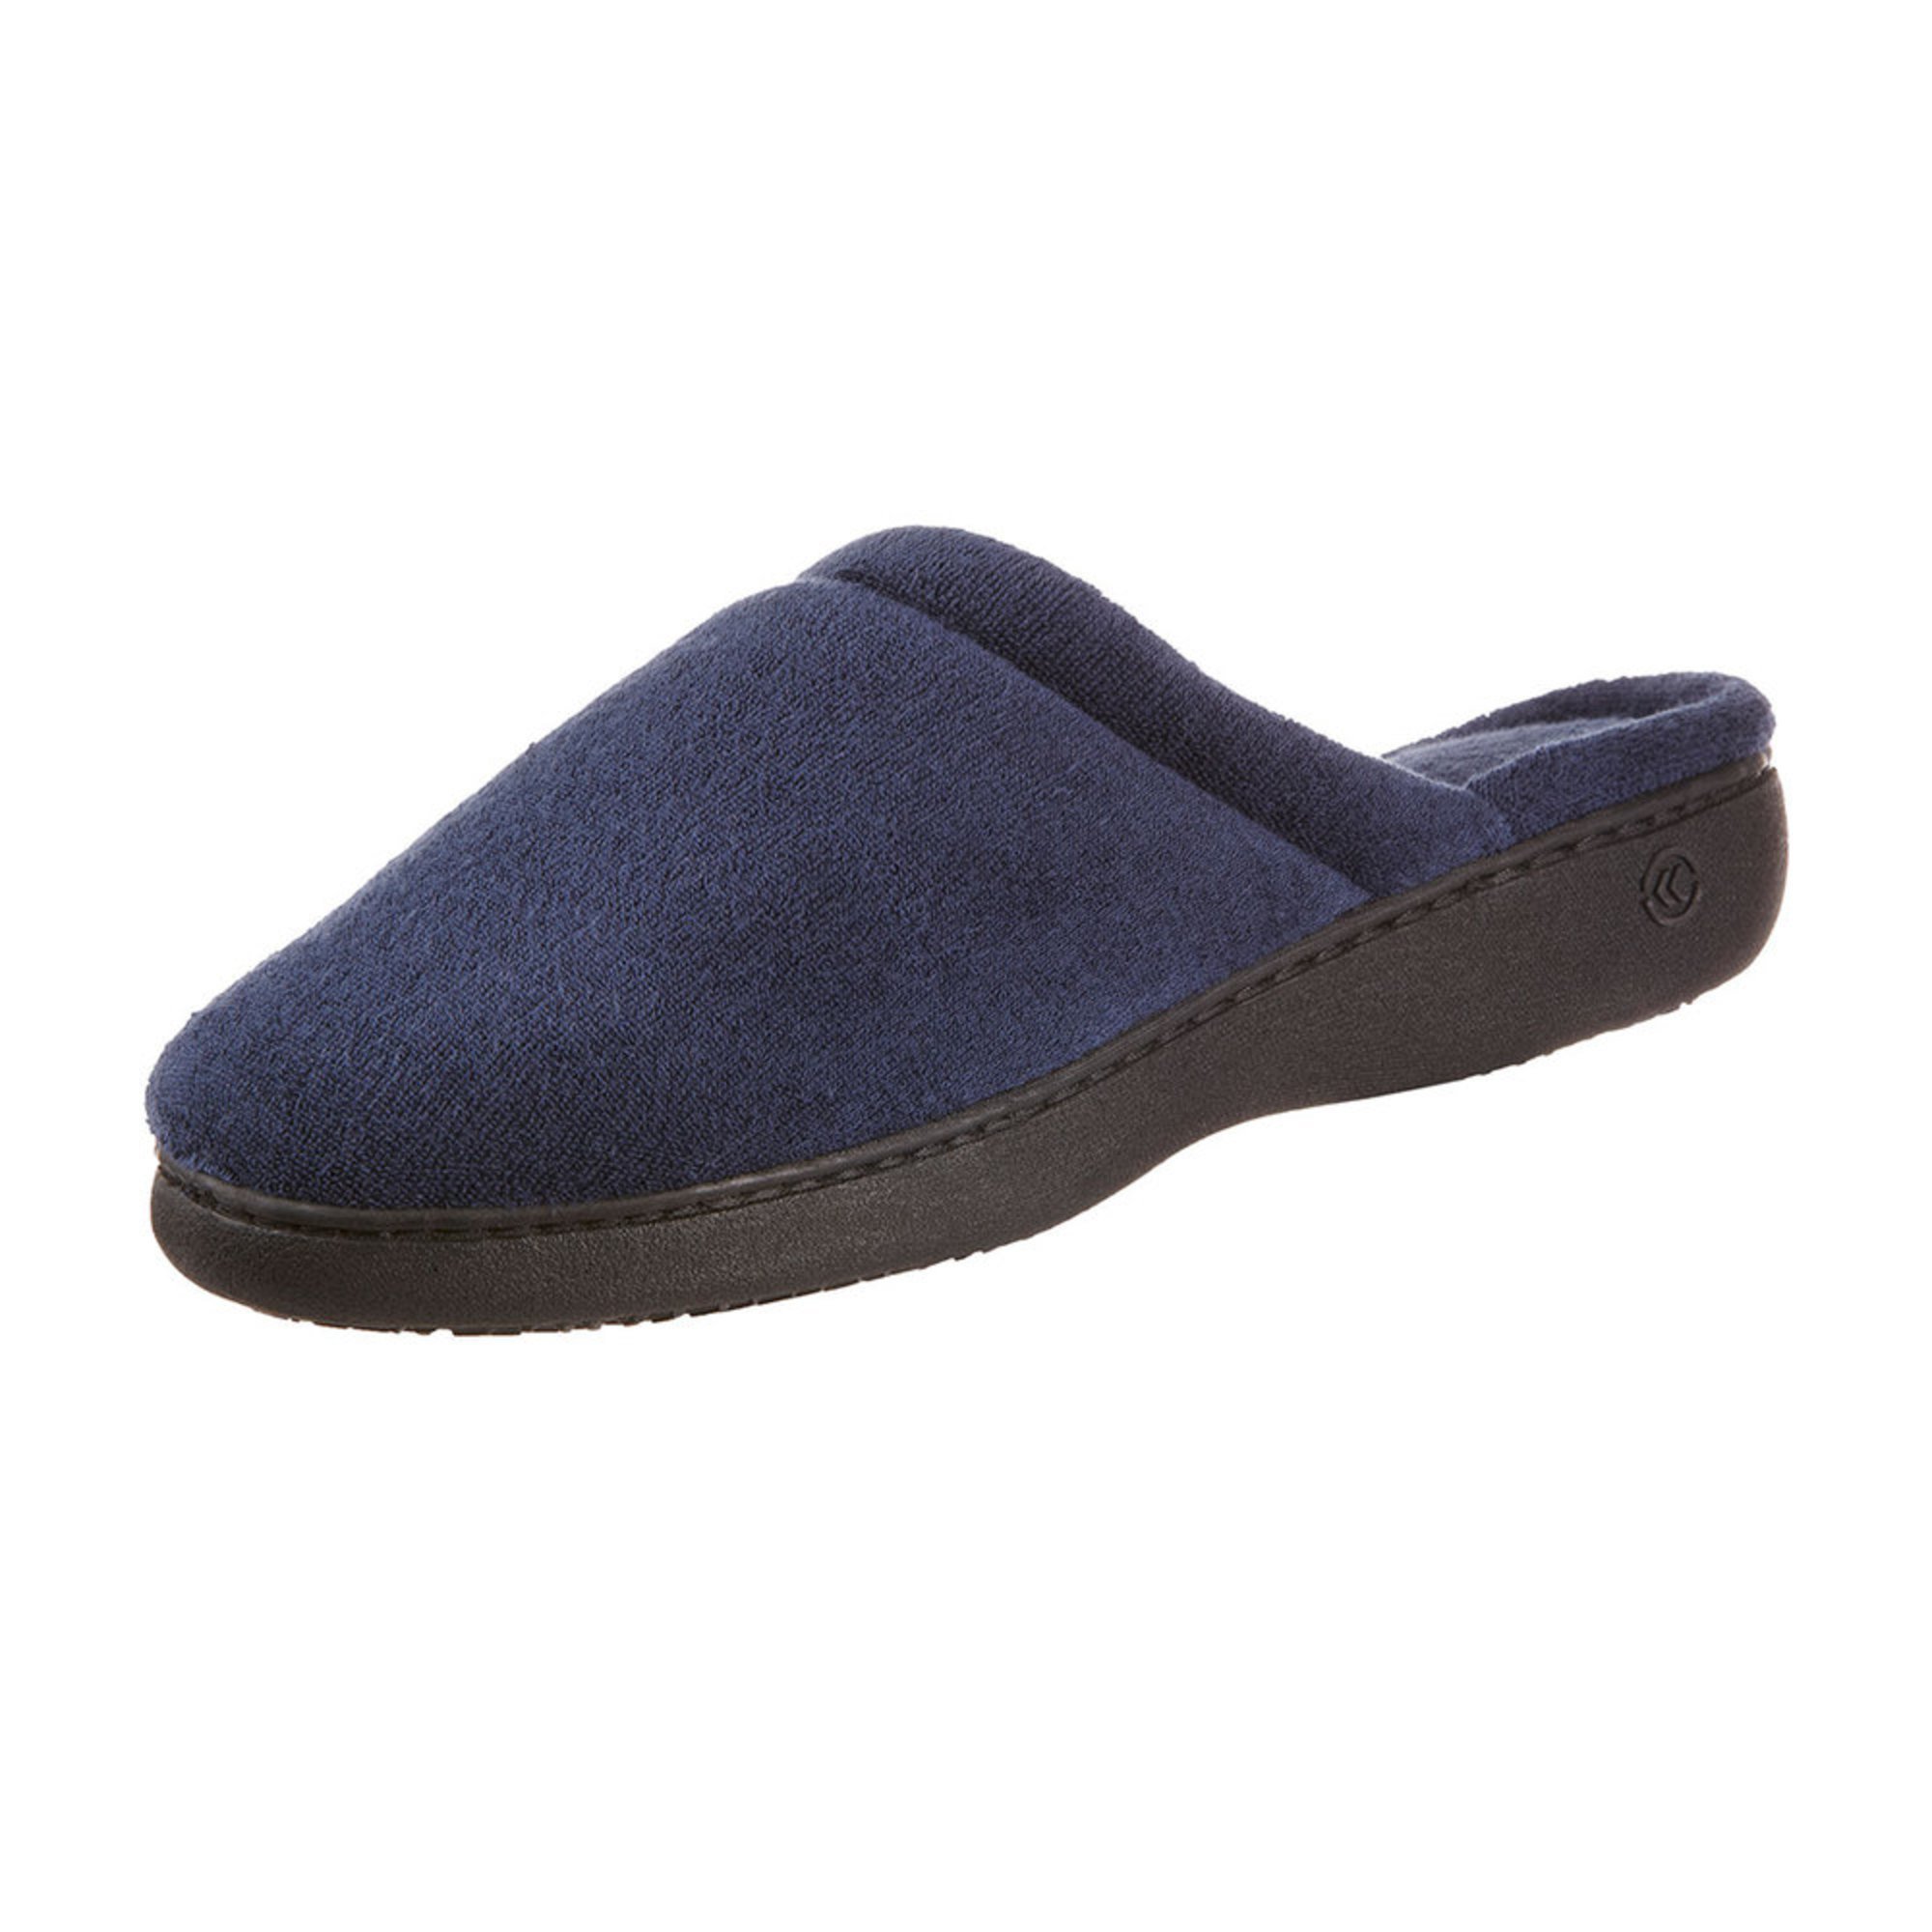 isotoner slippers with rubber sole